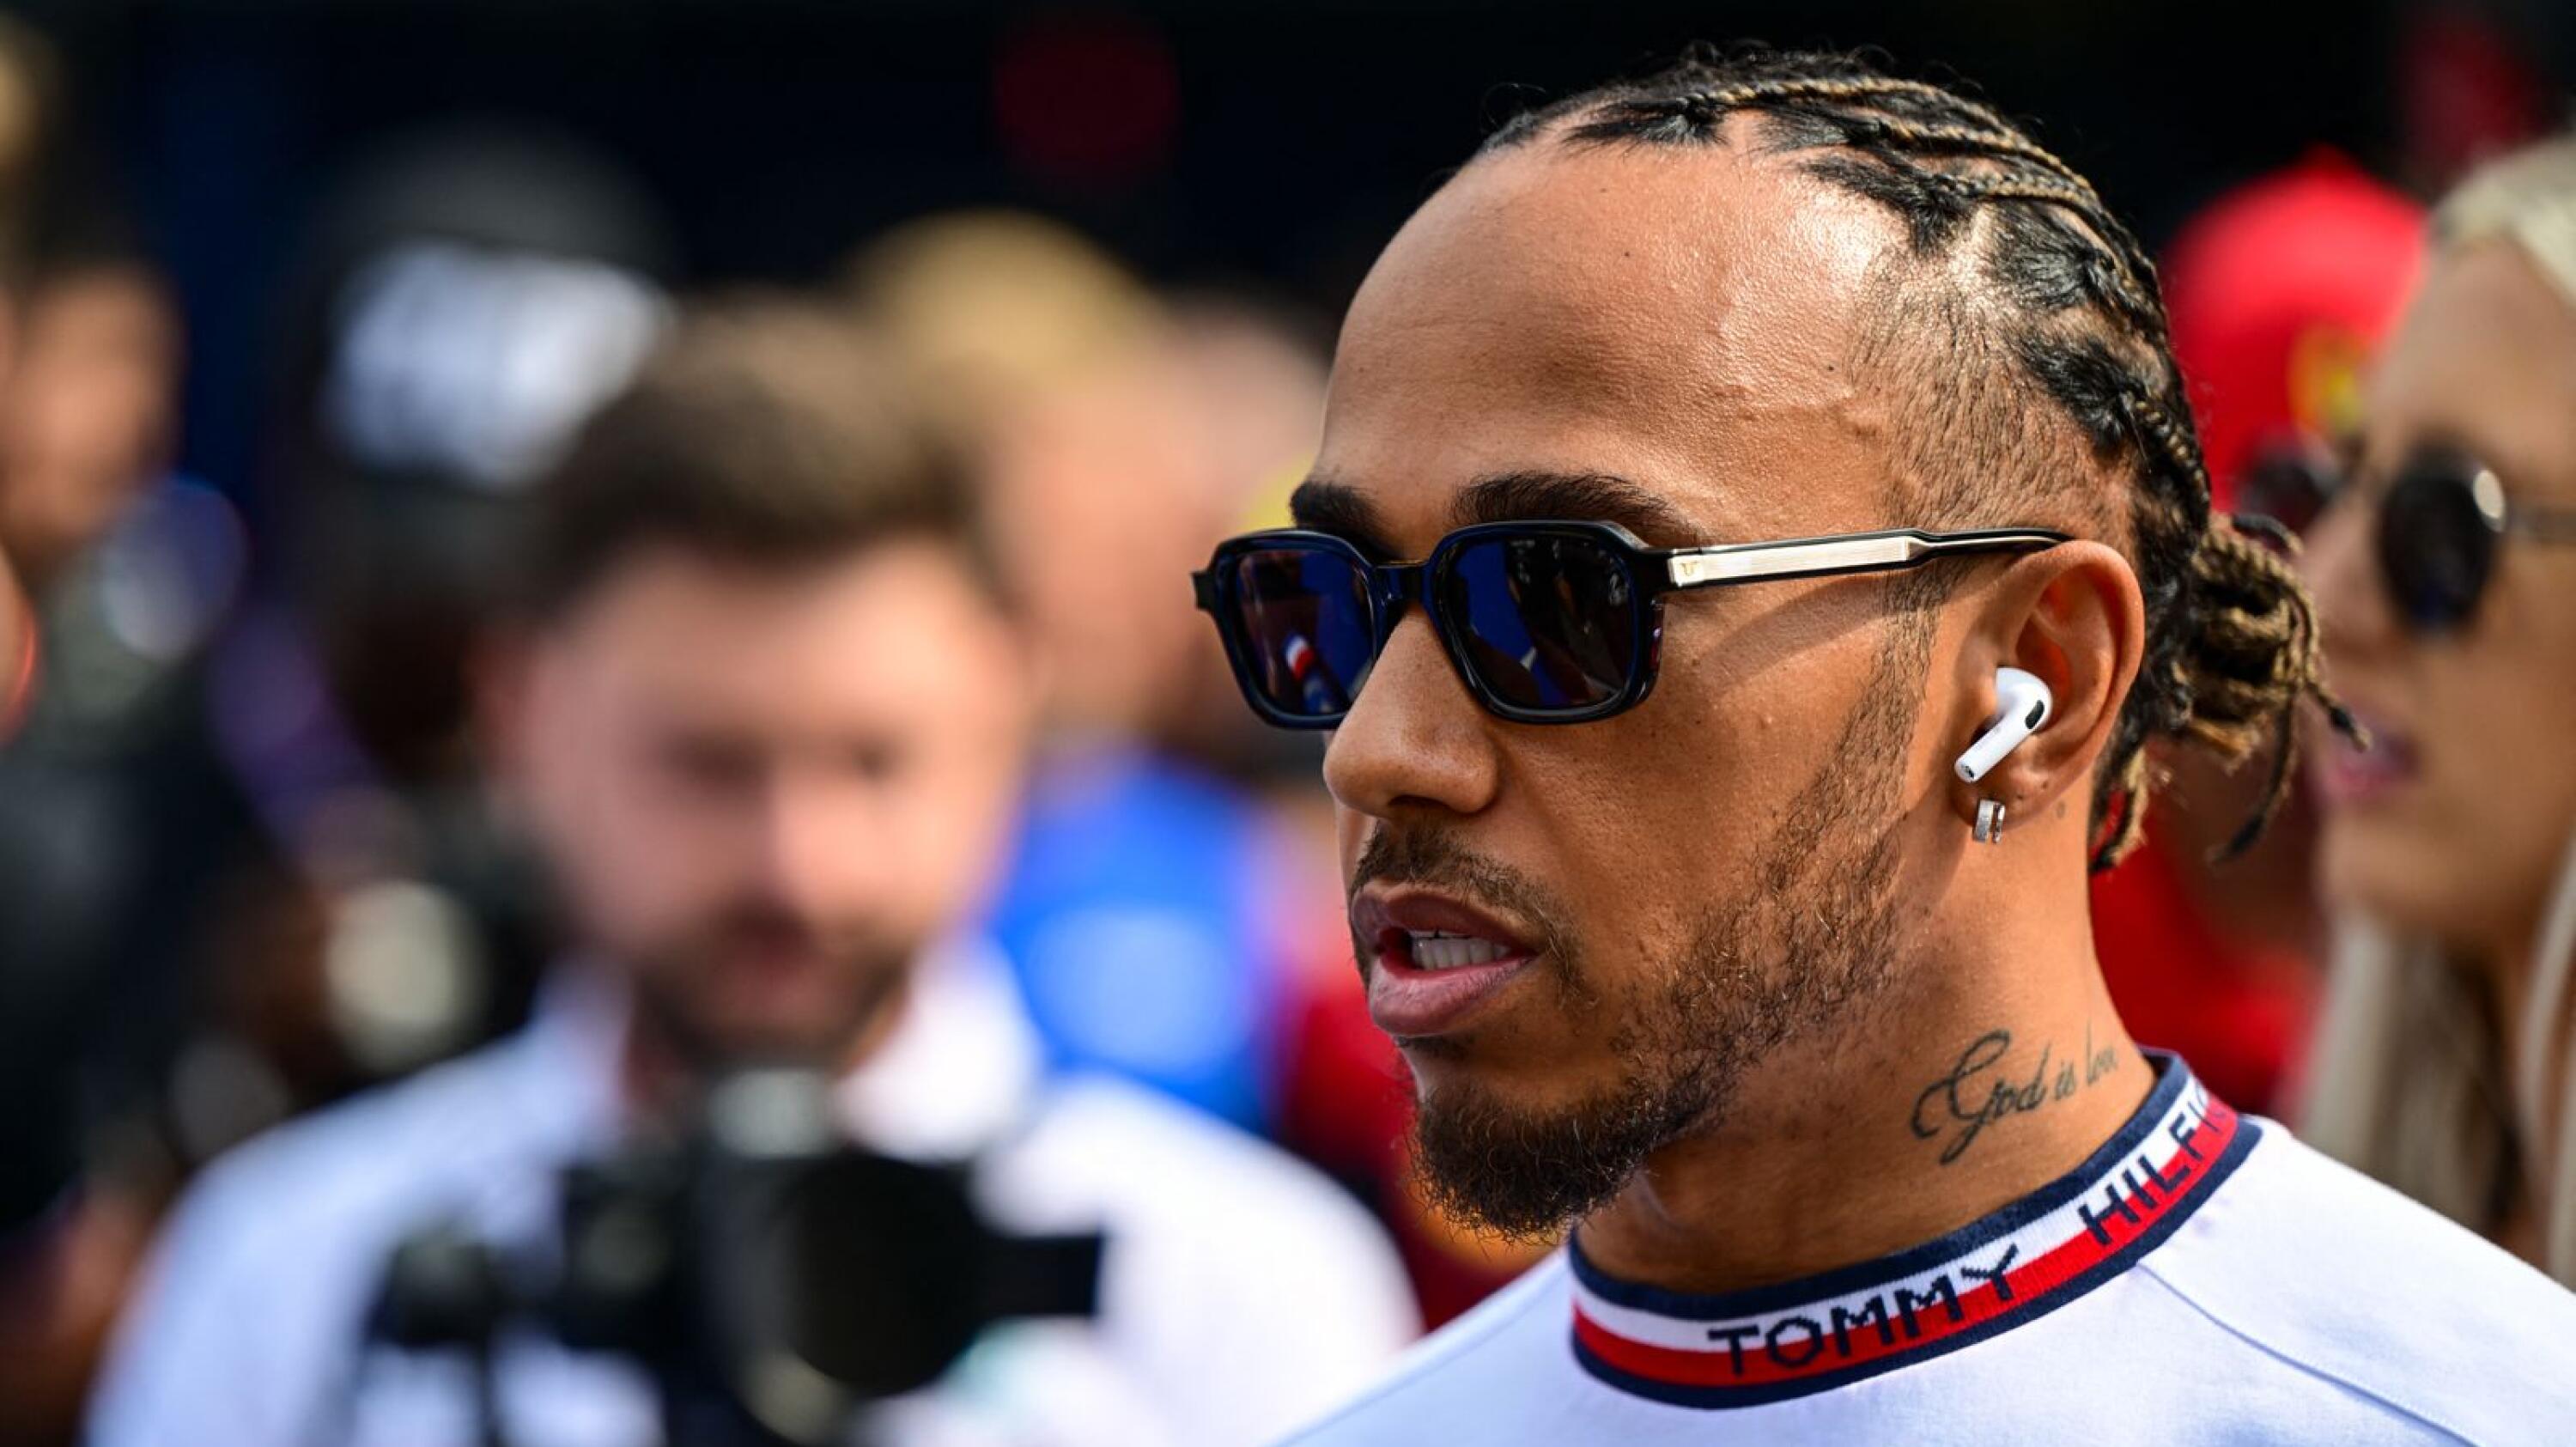 Mercedes' British driver Lewis Hamilton arrives for the drivers' parade ahead of the Dutch Formula One Grand Prix at the Zandvoort circuit